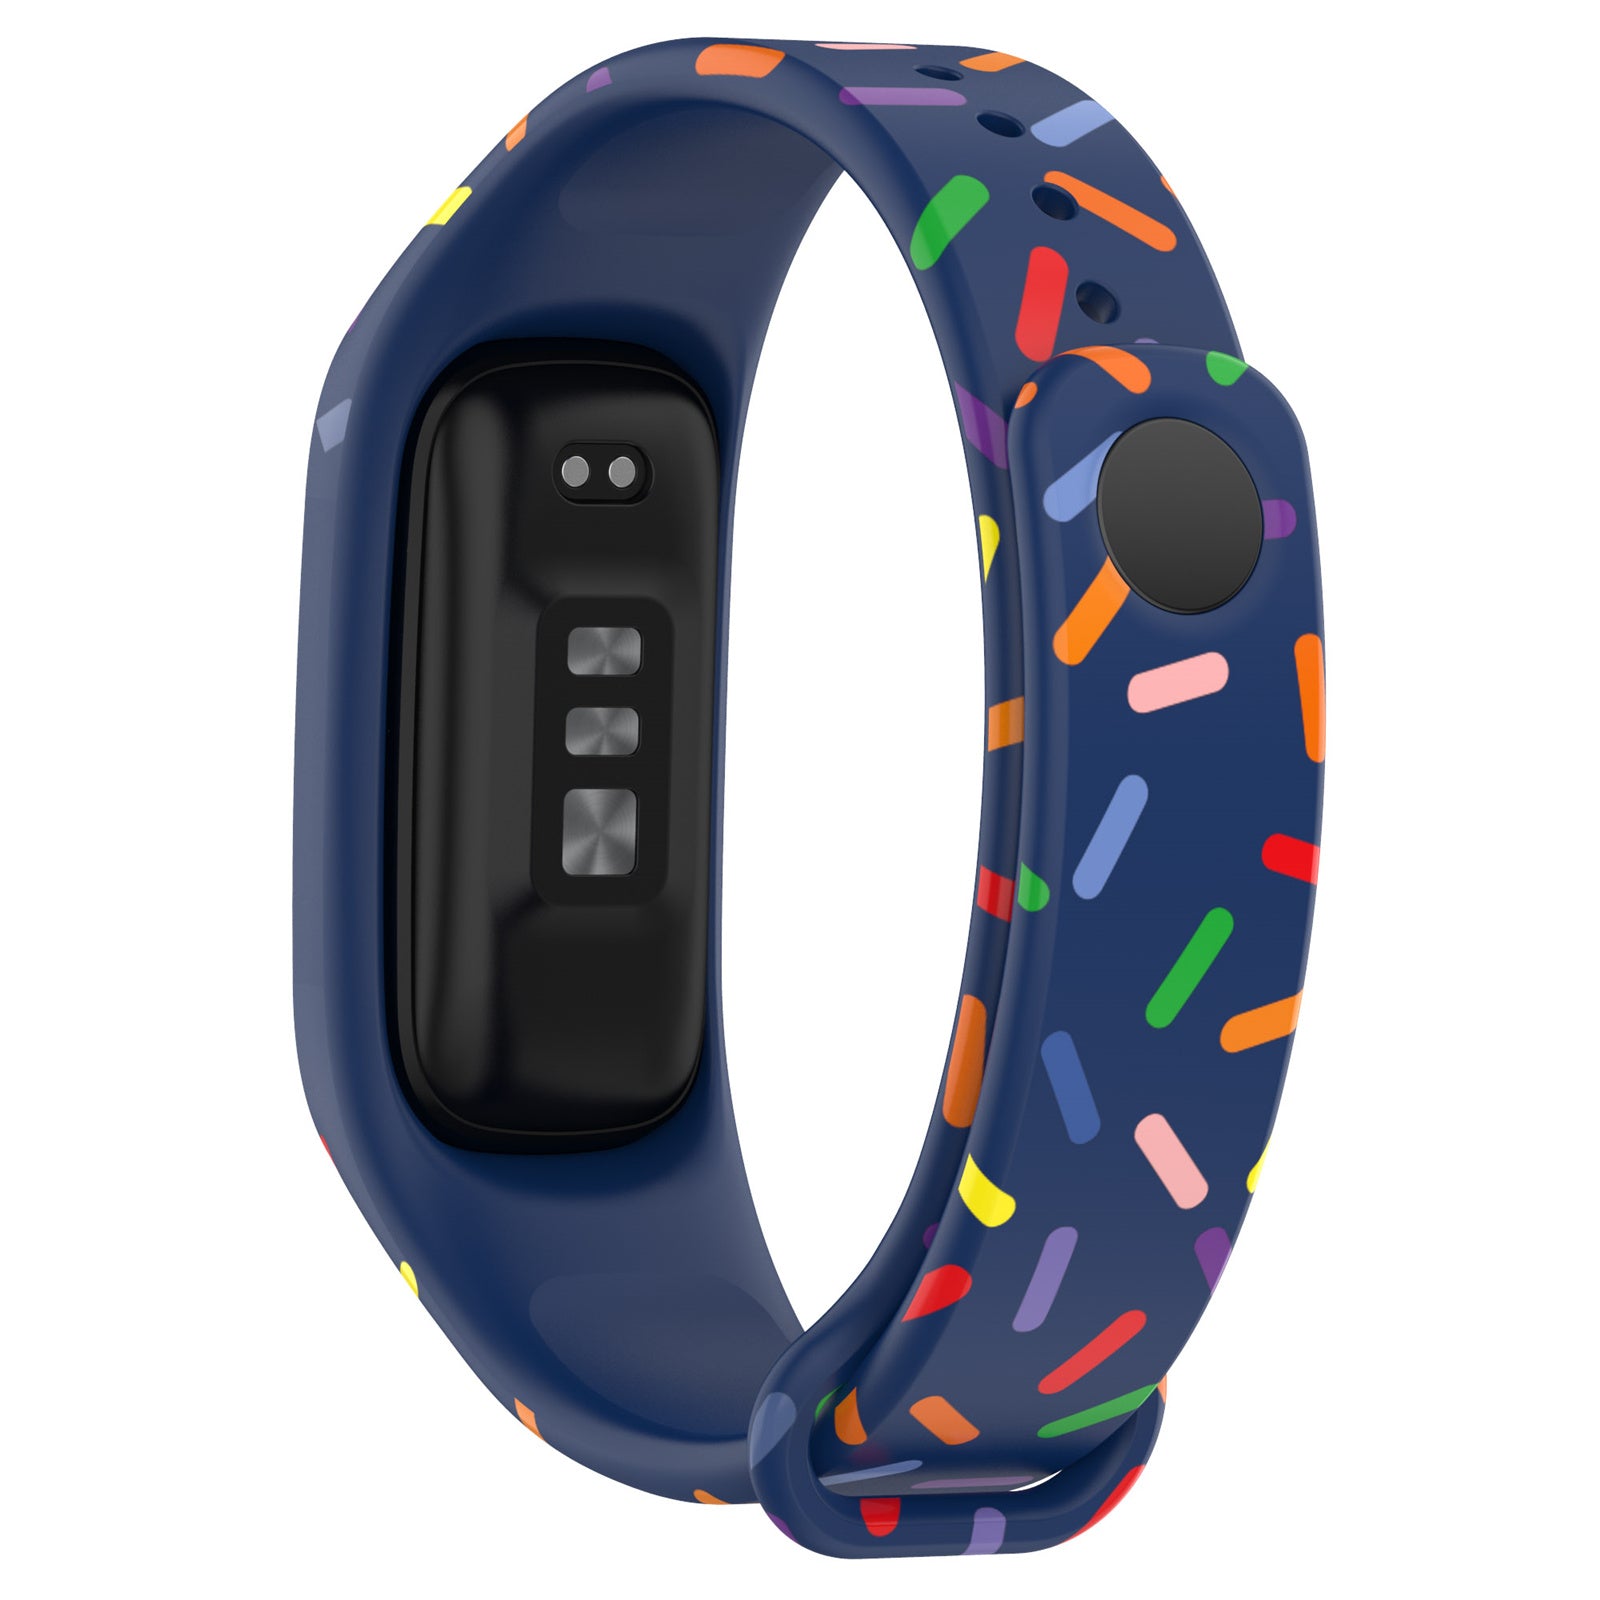 Uniqkart for Oppo Band Integrated Silicone Strap Watch Case Colorful Spotted Wrist Band - Midnight Blue